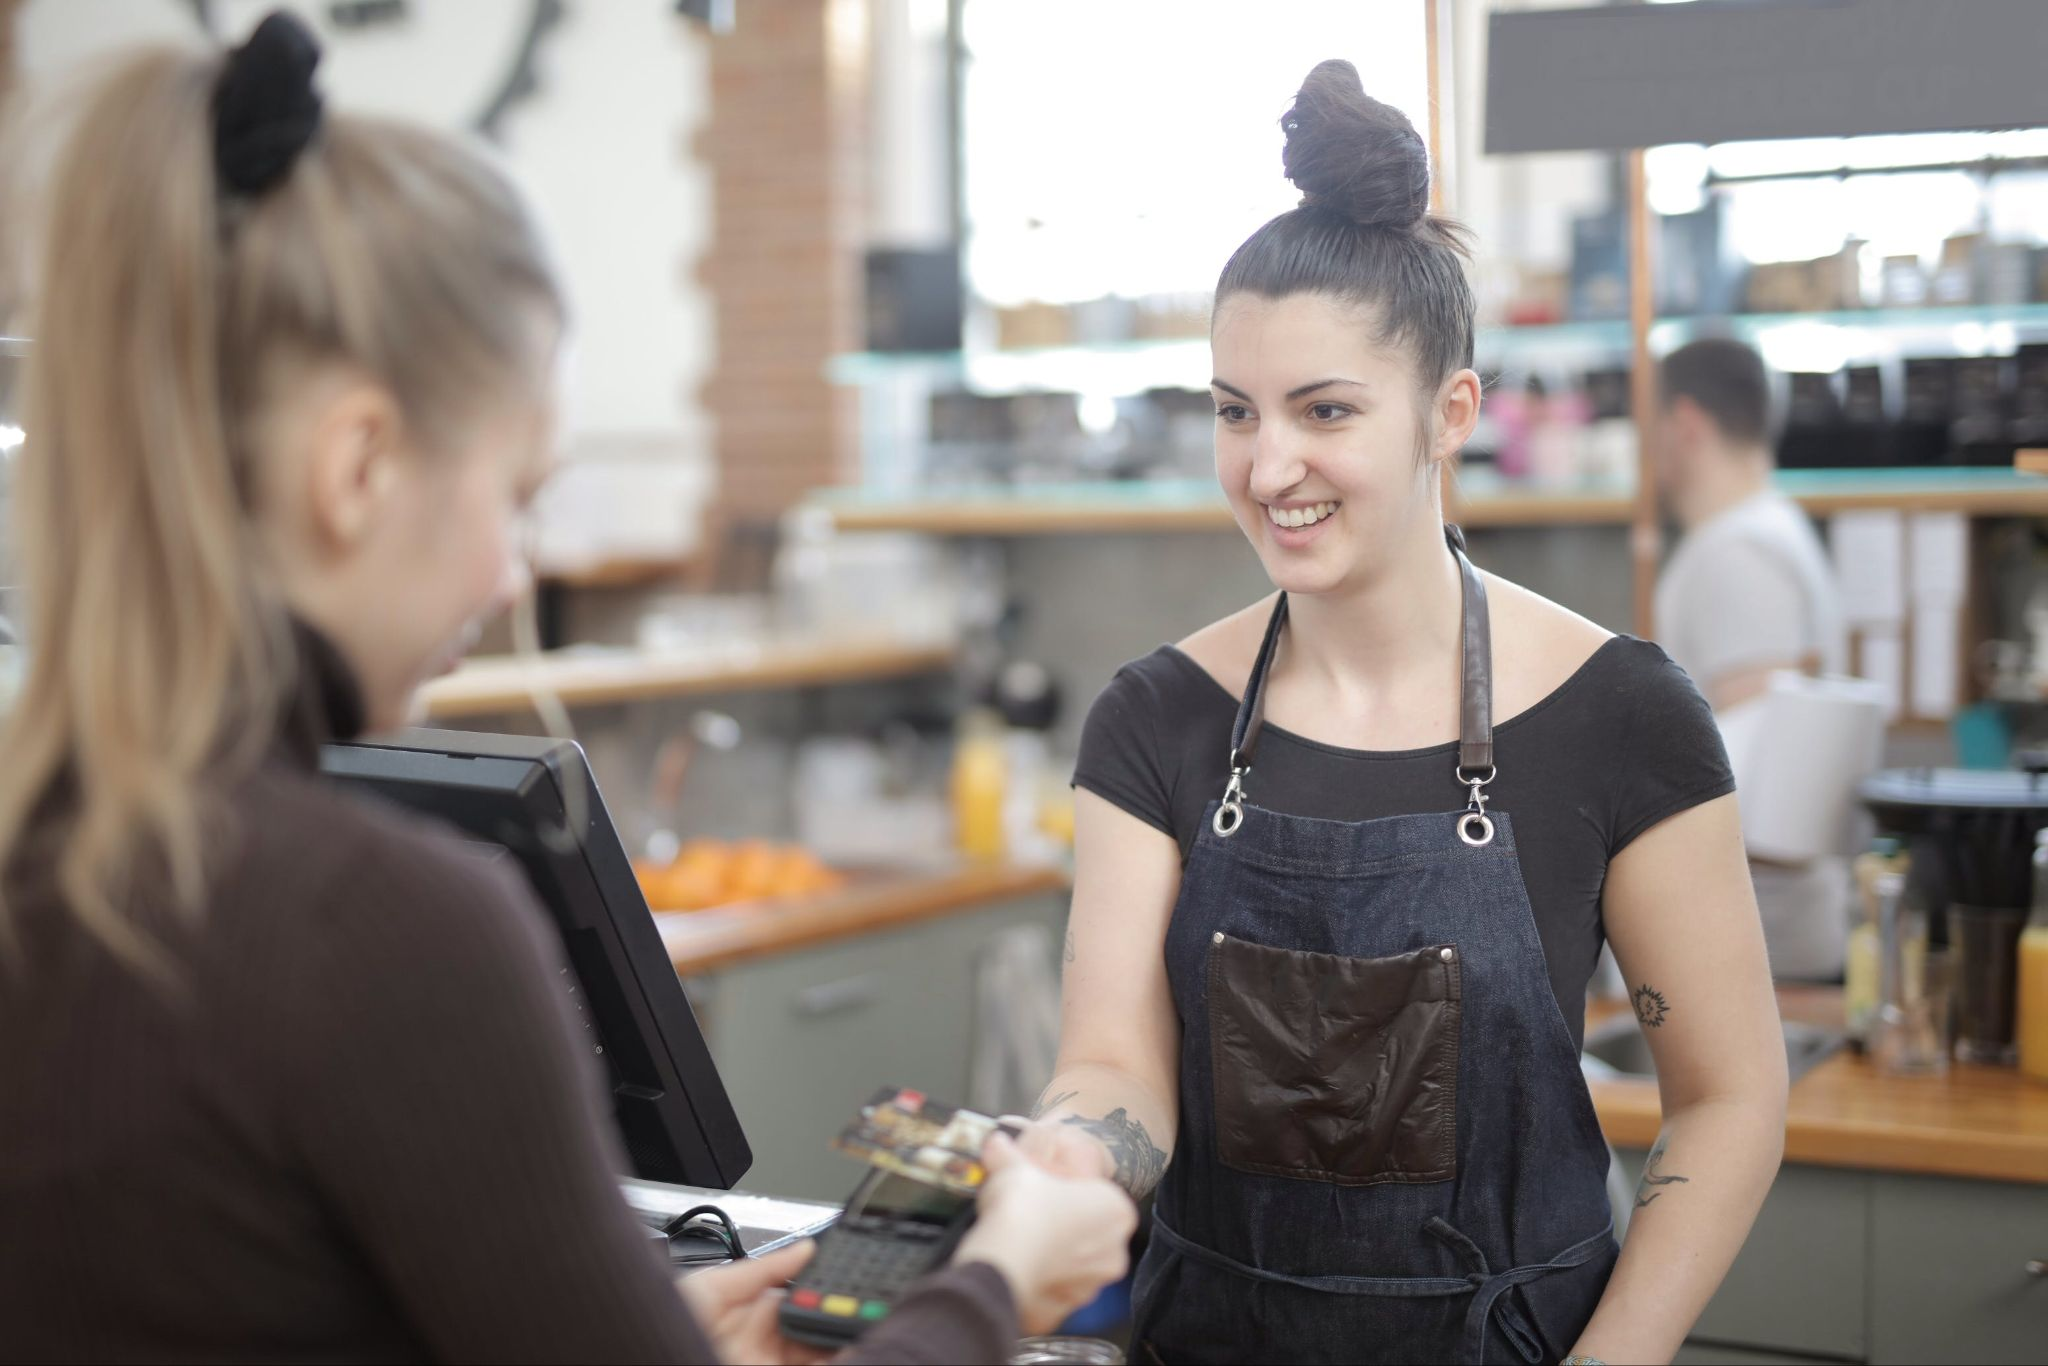 What Role Does Technology Play in EFTPOS Processing Today?